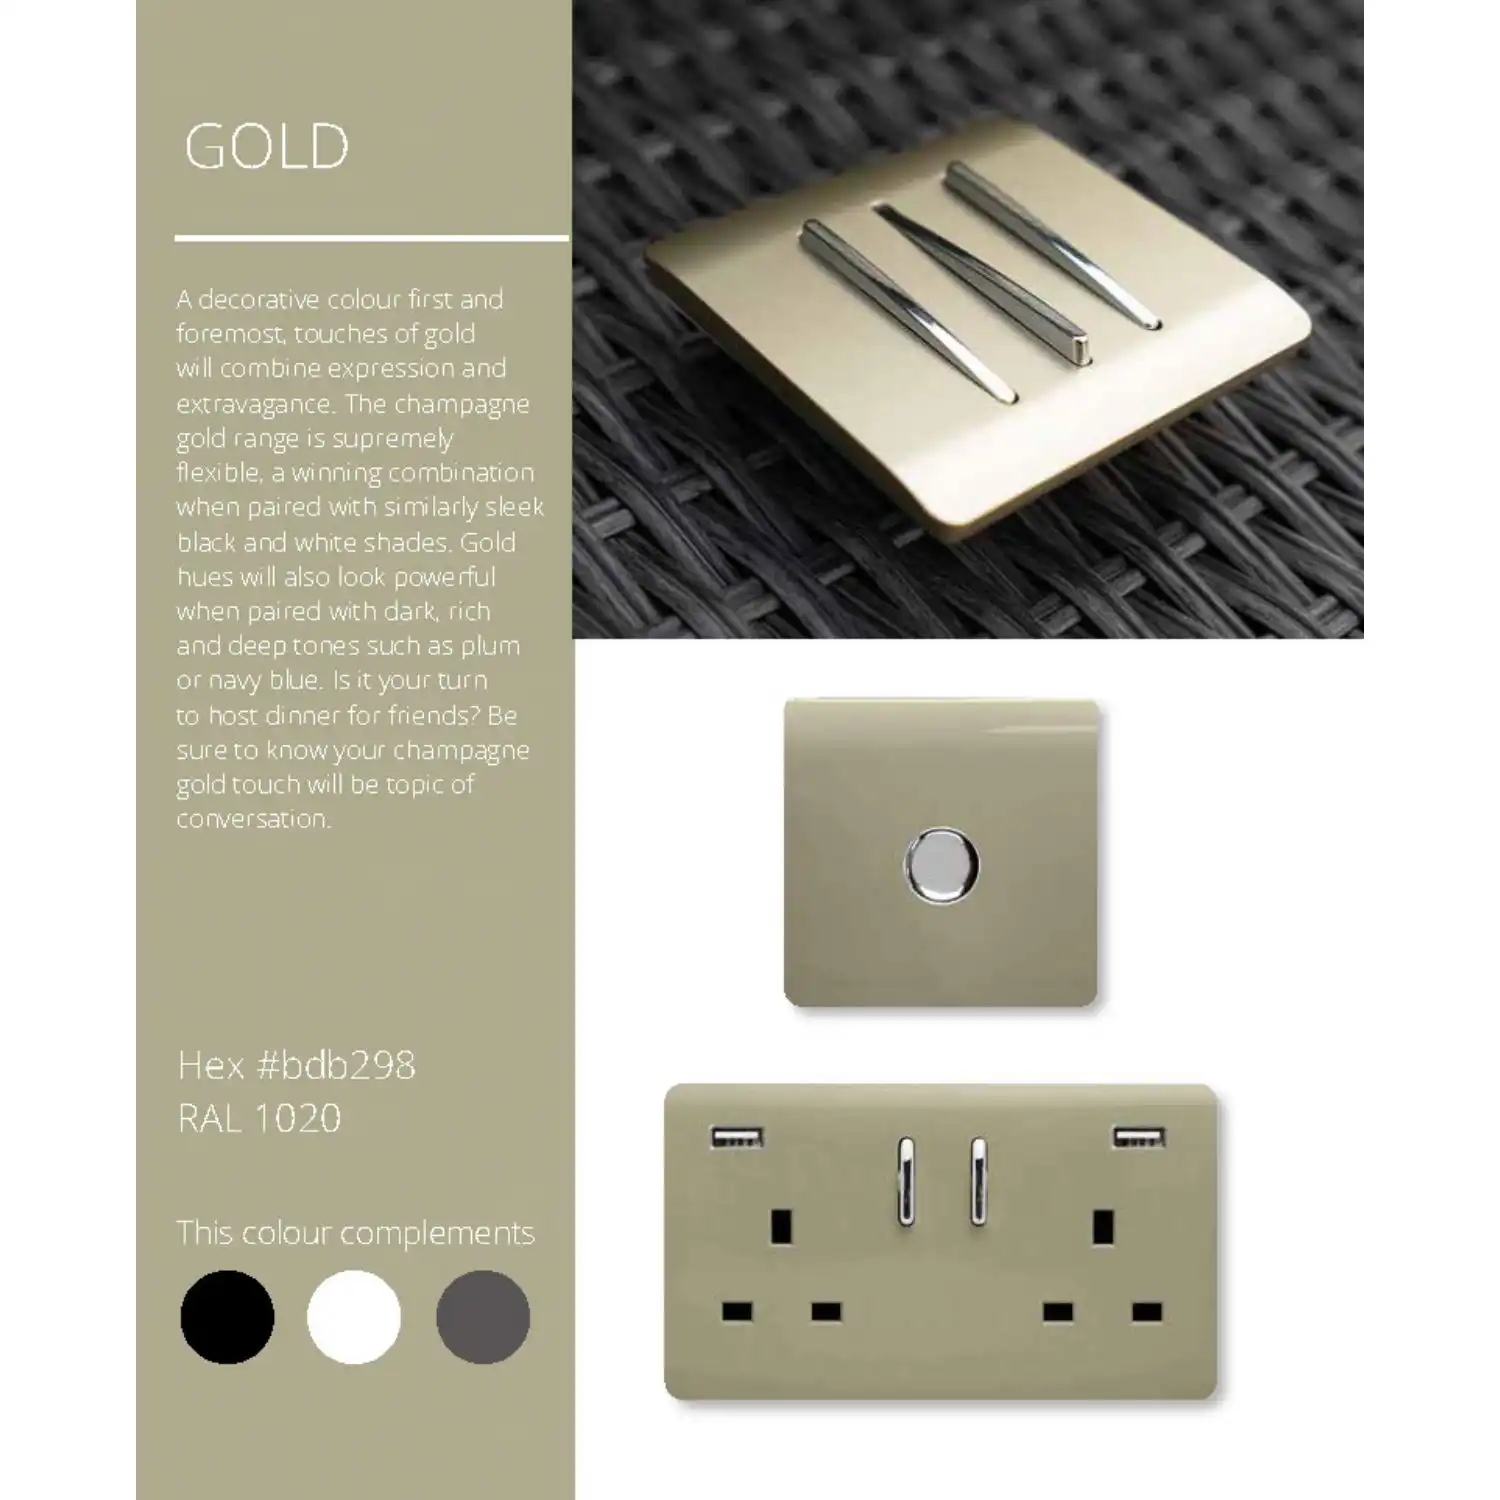 Trendi, Artistic Modern Cooker Control Panel 13amp with 45amp Switch Gold Finish, BRITISH MADE, (47mm Back Box Required), 5yrs Warranty